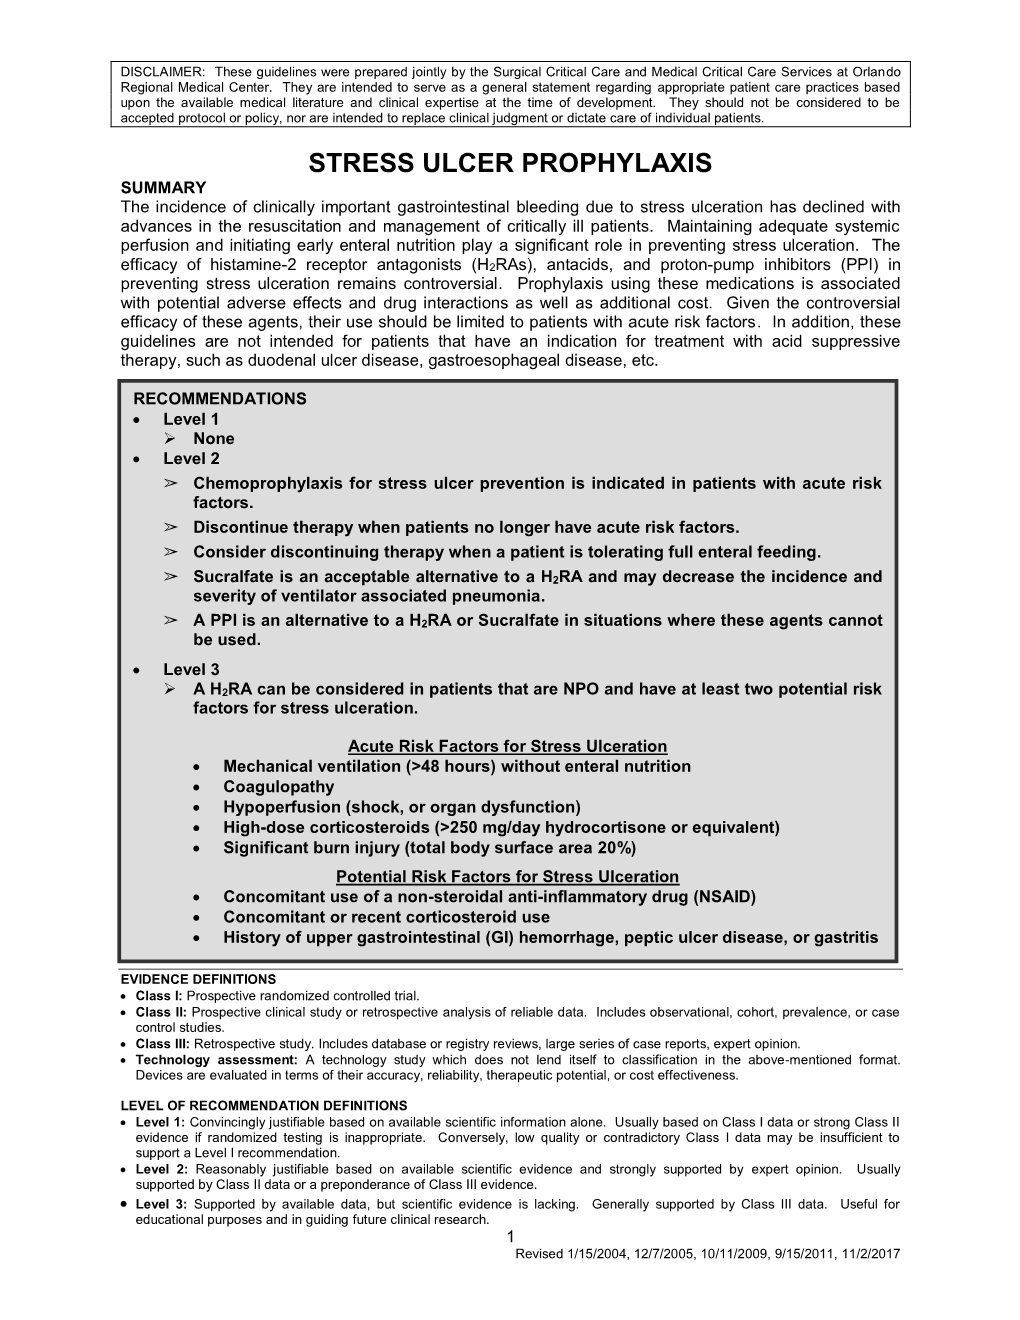 Stress Ulcer Prophylaxis